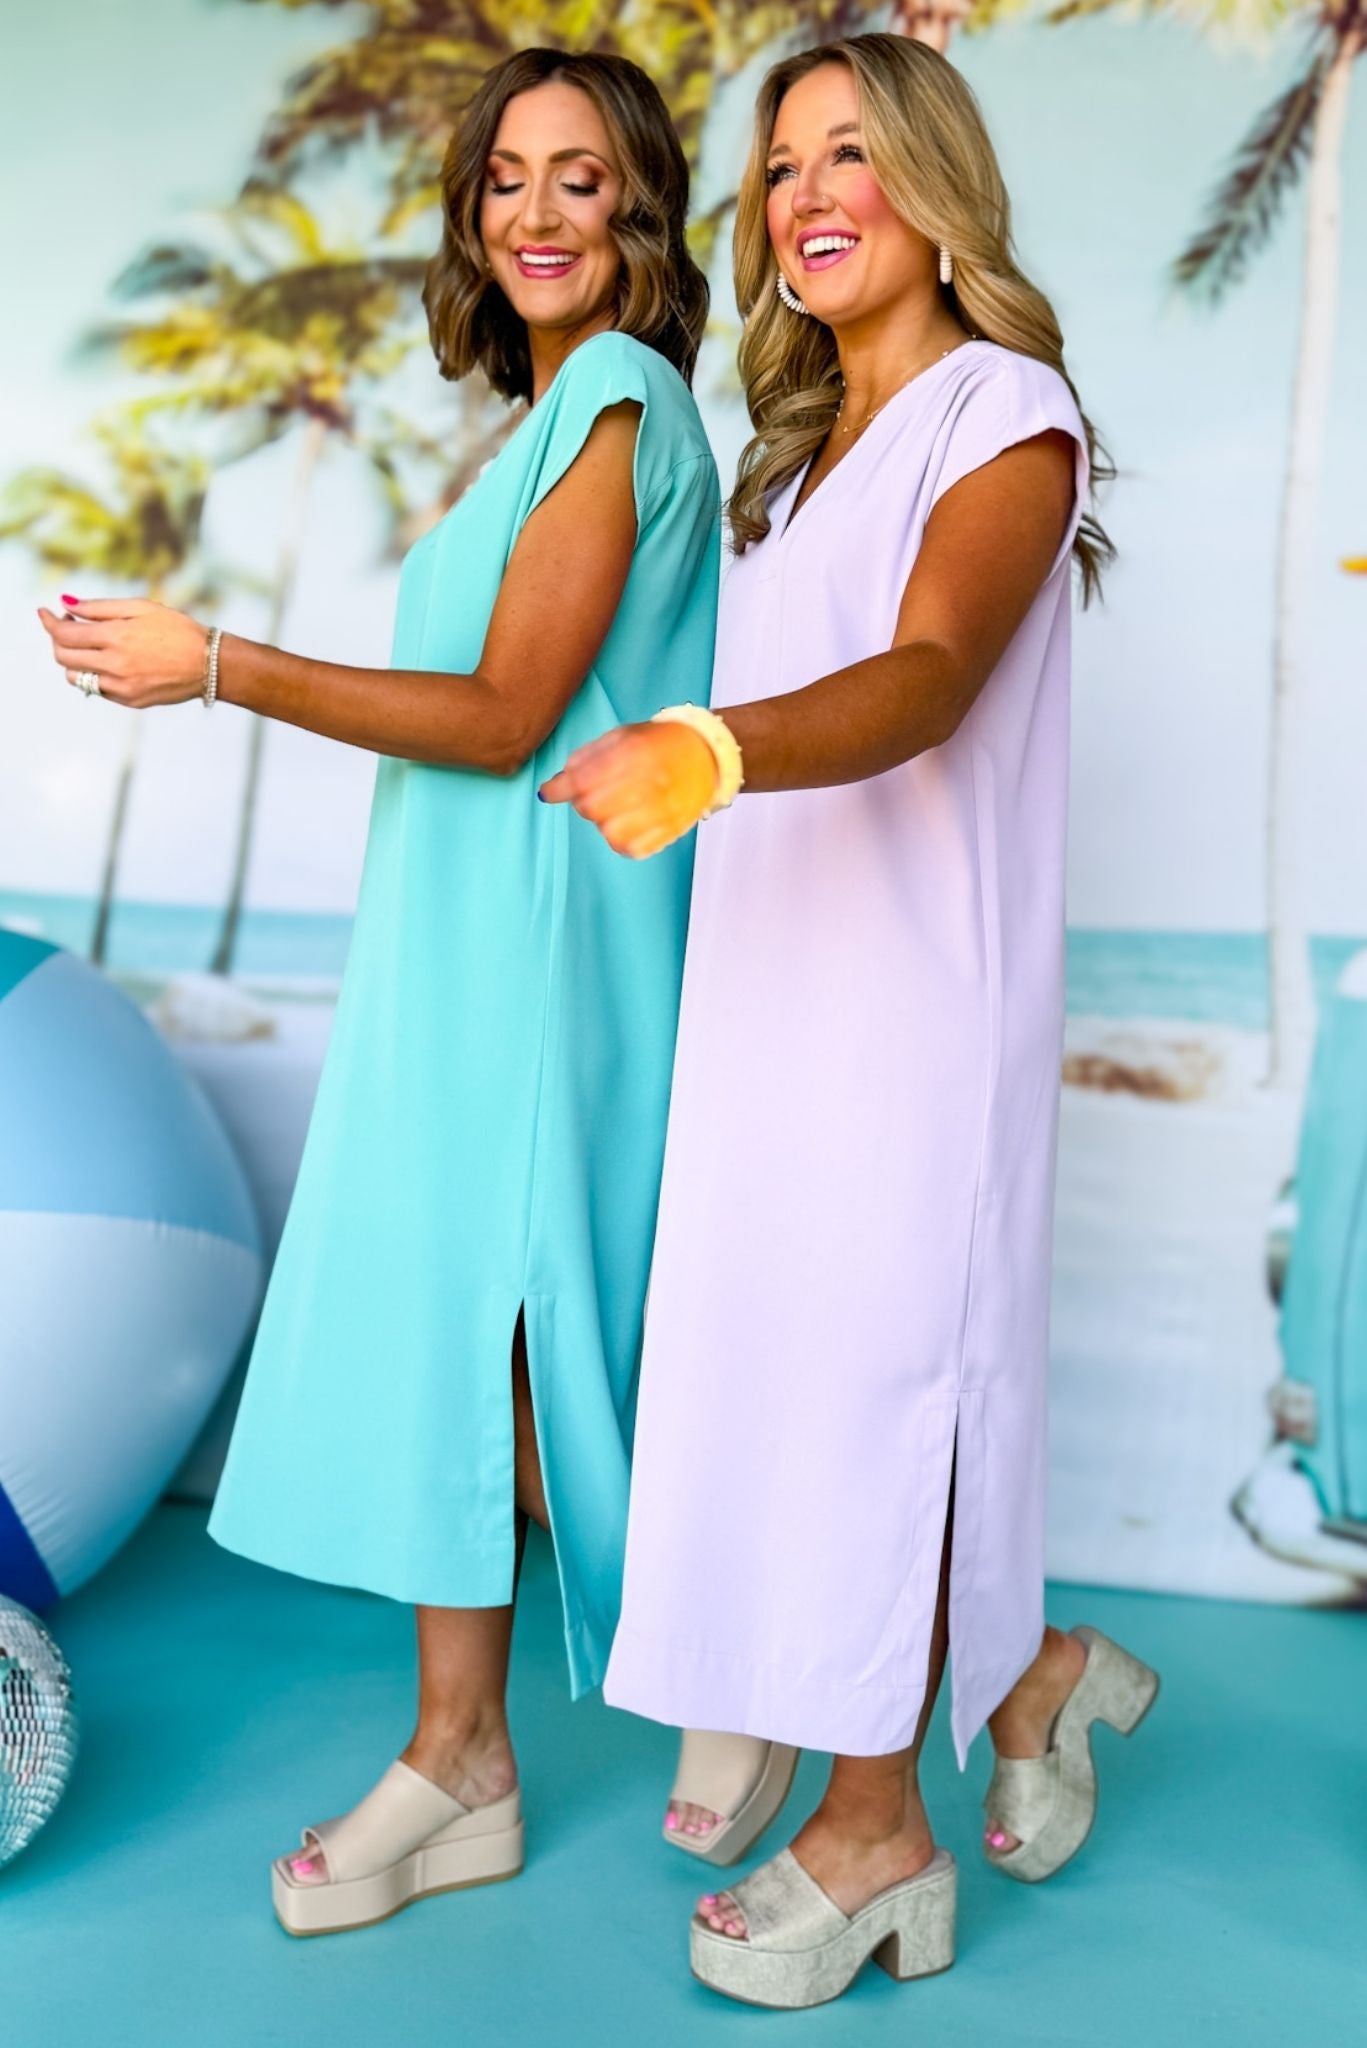 SSYS The Iris Maxi Dress In Aqua Blue, ssys the label, spring break top, spring break style, spring fashion affordable fashion, elevated style, bright style, bright dress, mom style, shop style your senses by mallory fitzsimmons, ssys by mallory fitzsimmons